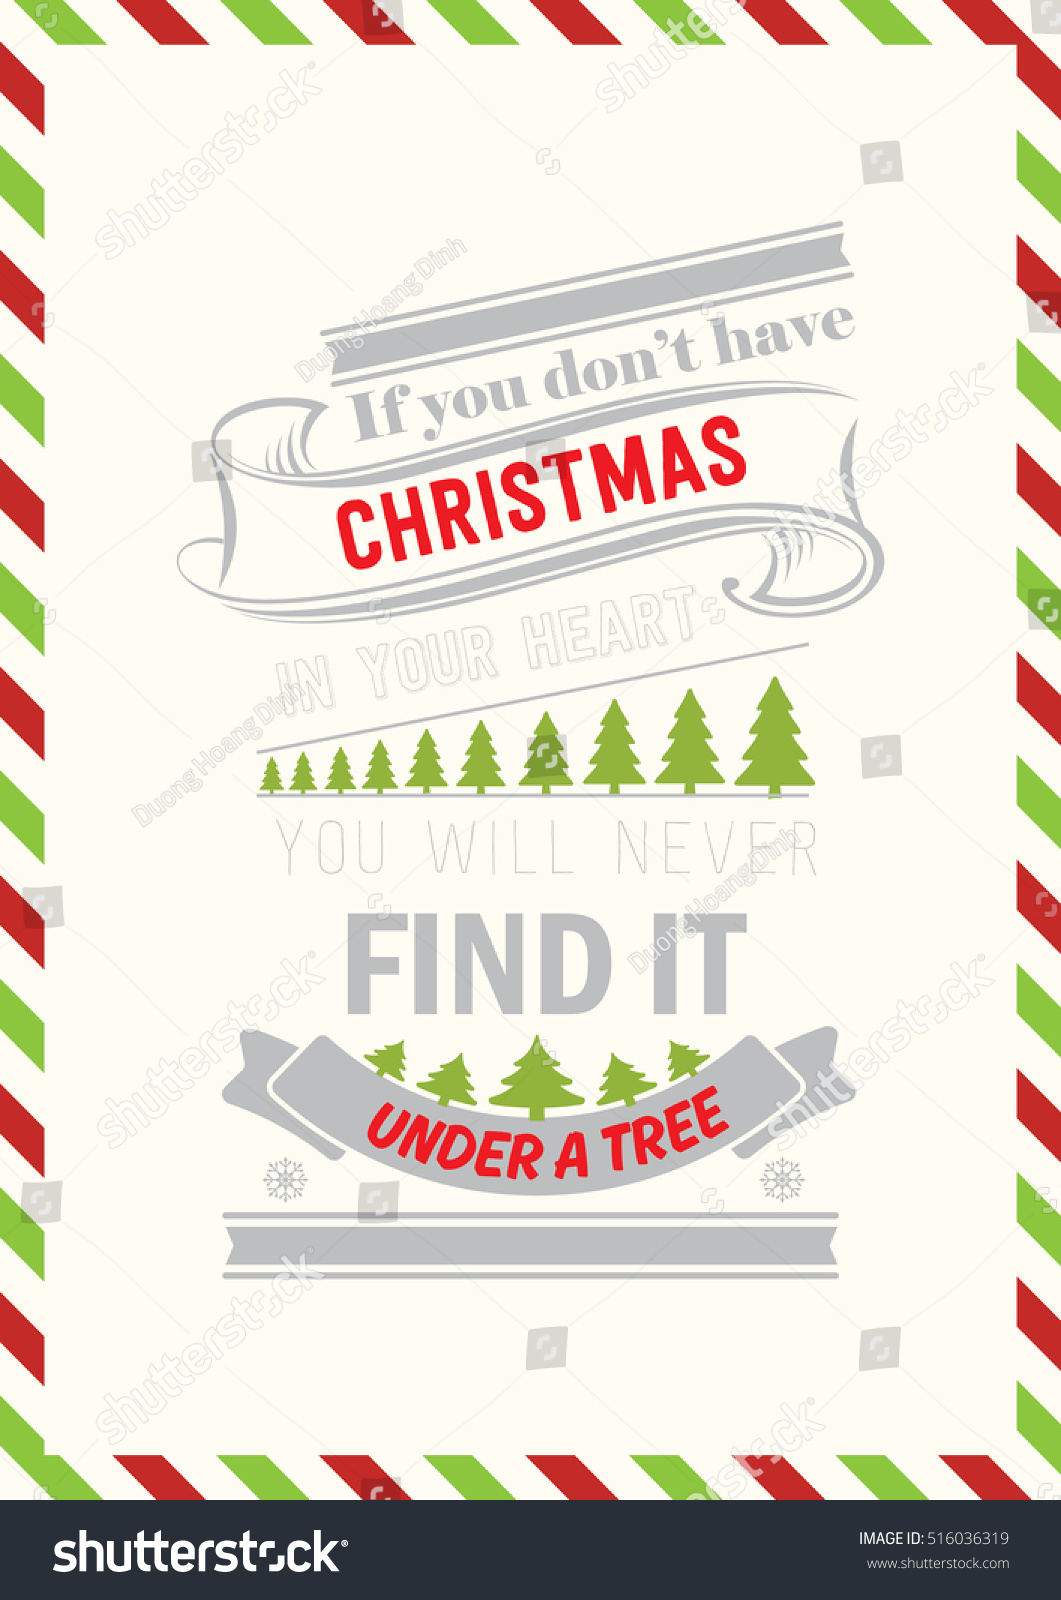 Christmas Quote. If You Don'T Have Christmas In Your Heart, You Will Never Find It Under A Tree ...